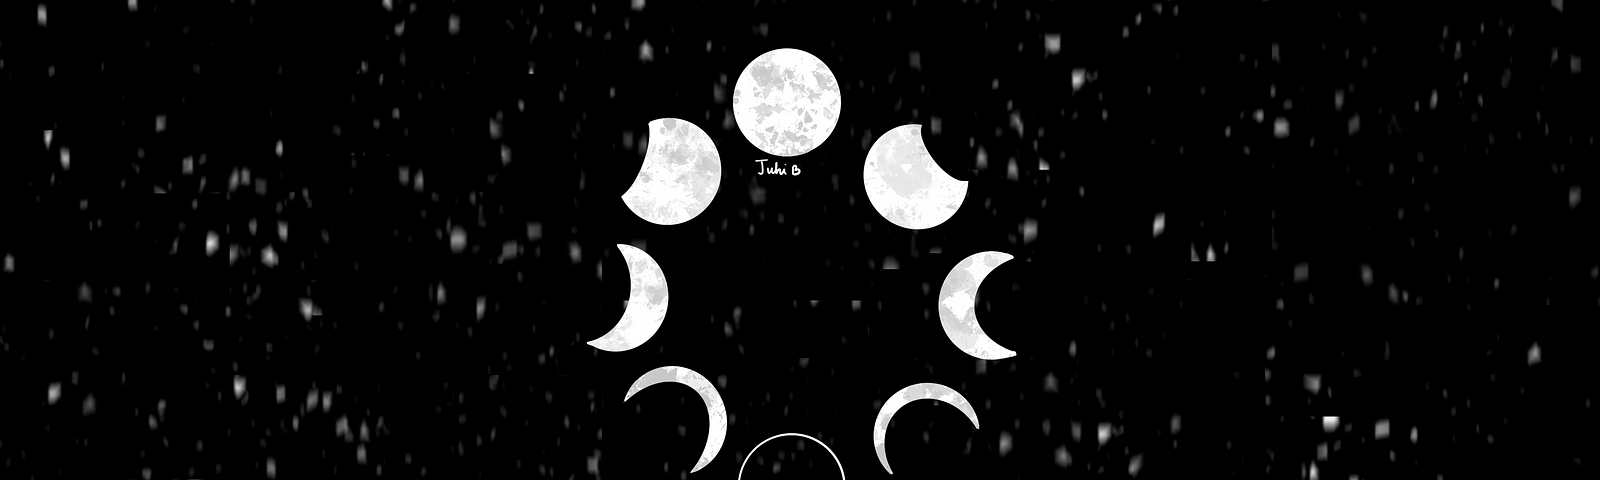 Art of the phases of the moon arranged in a circle, from a full moon on top to a new moon on the bottom and circling back to the full moon on top